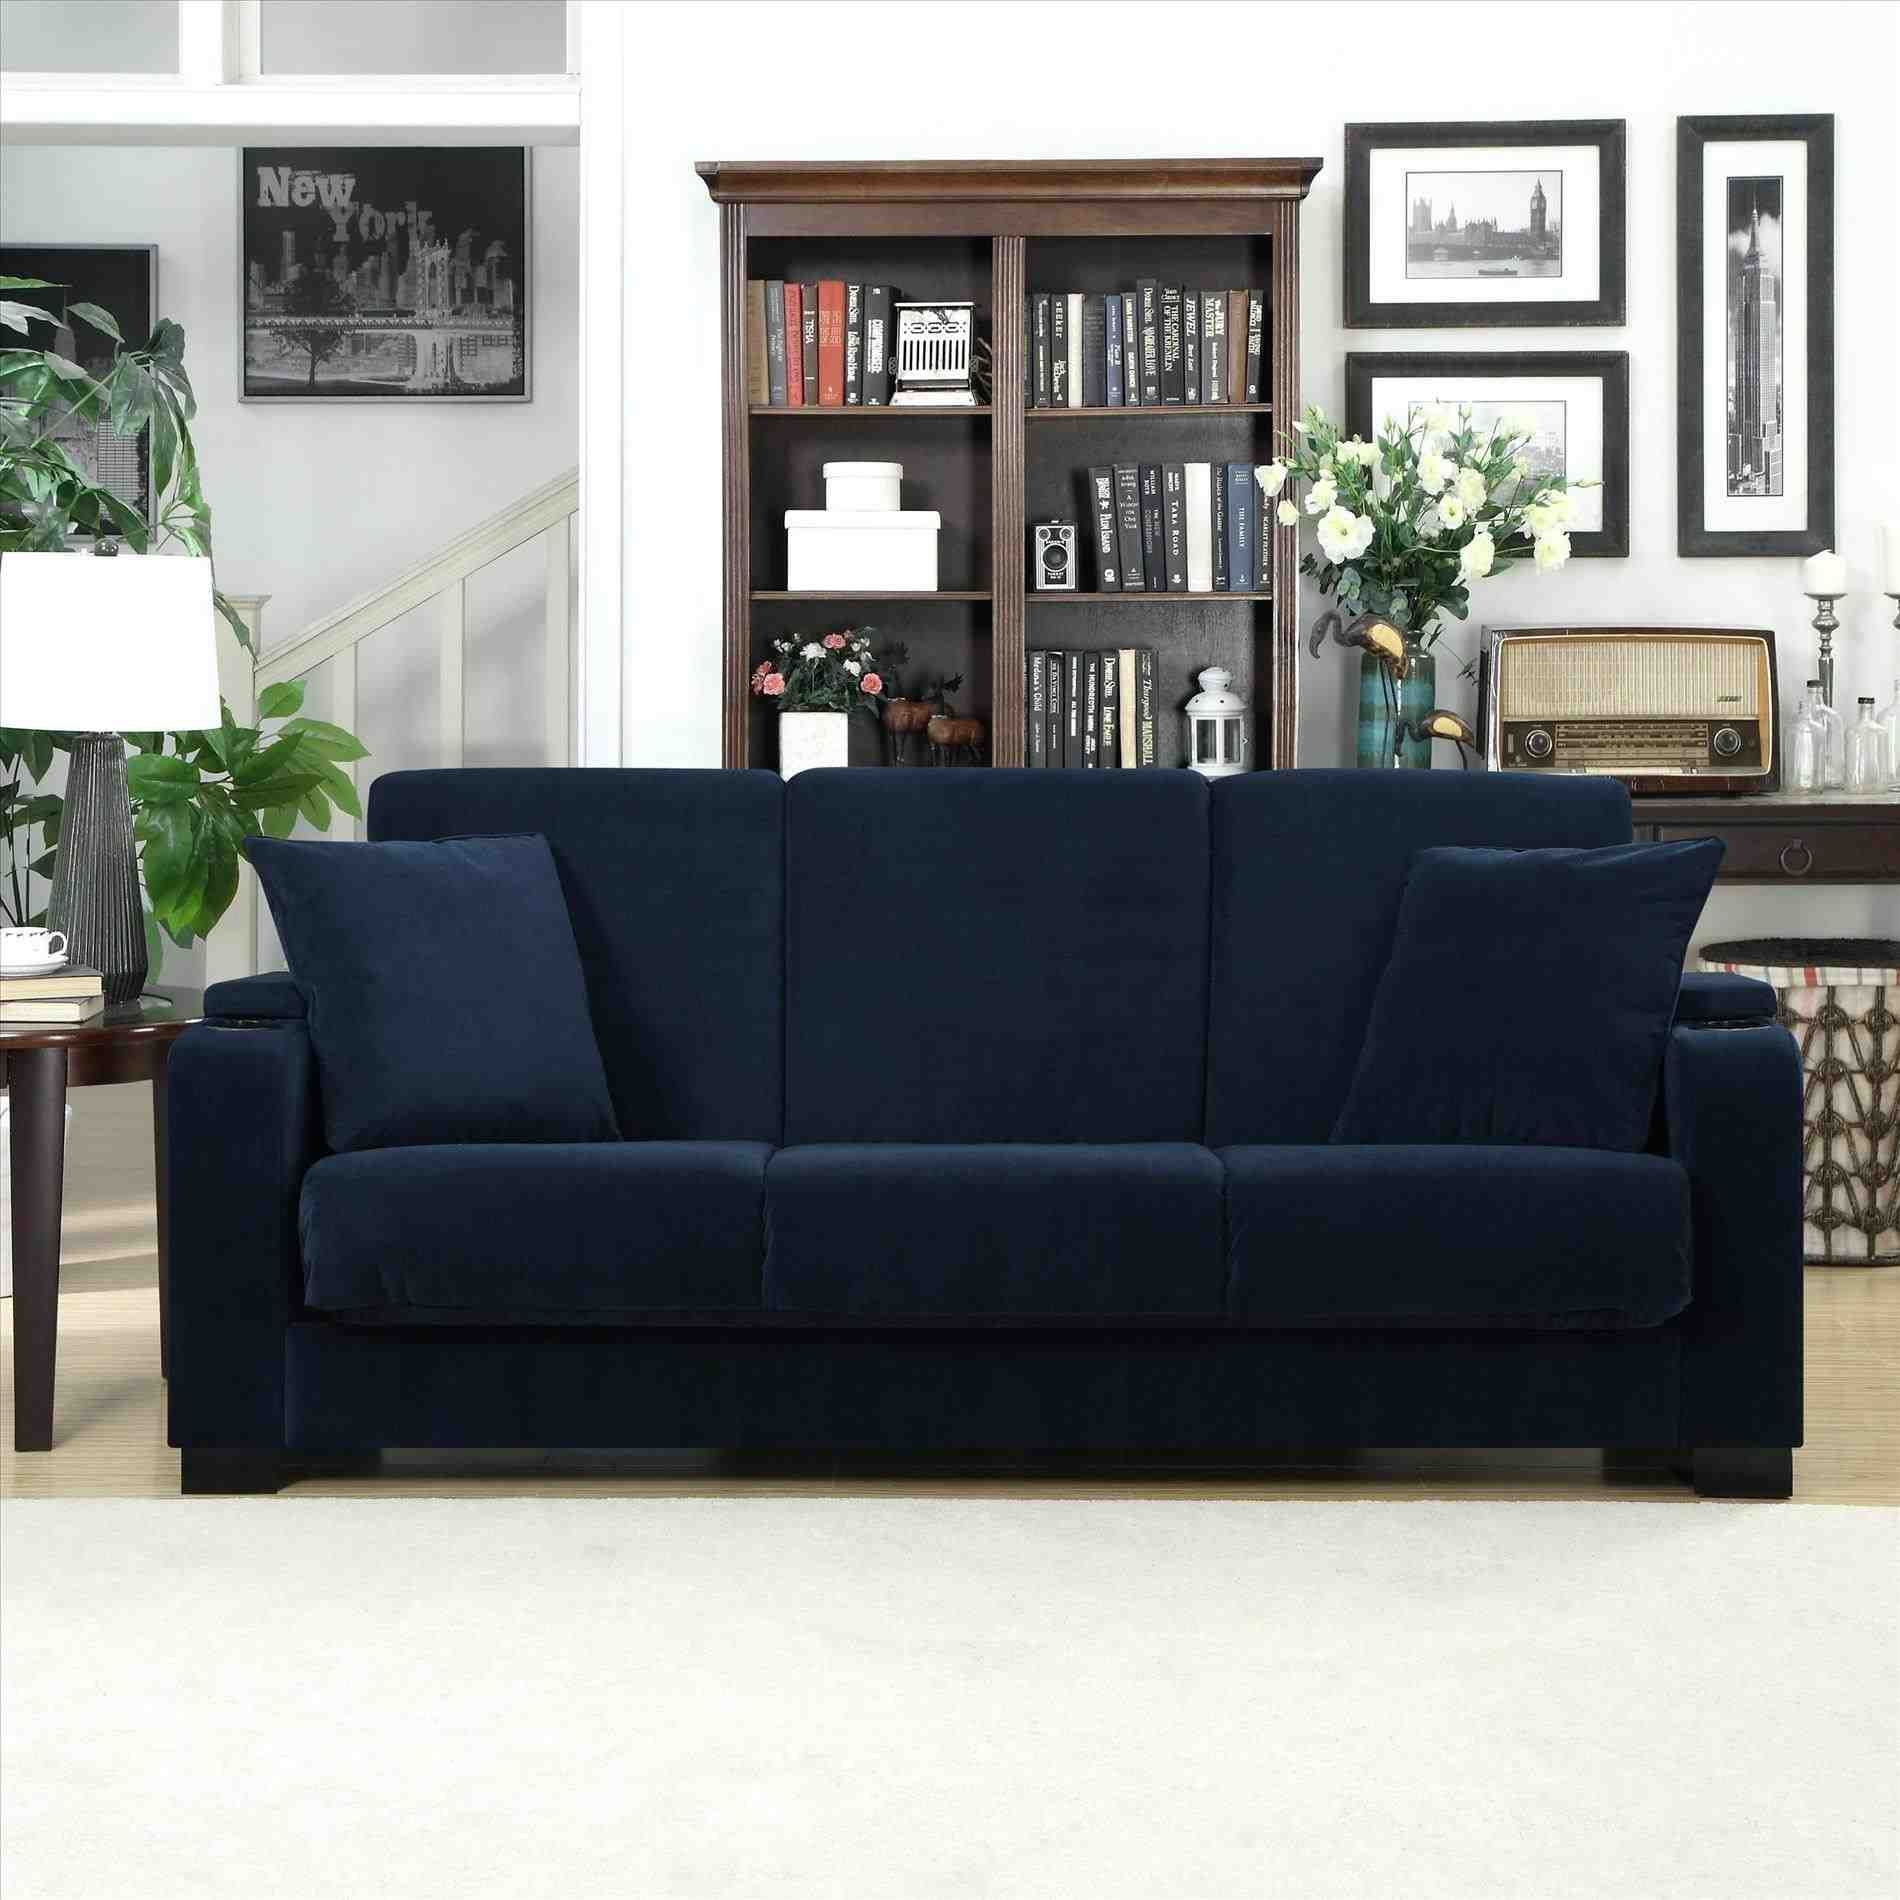 Cheap Sofa Deals Uk - living room chairs cheap furniture prices in nigeria  uk only sale. full size of sofa:pull out couch cheap corner sofas corner  sofa bed